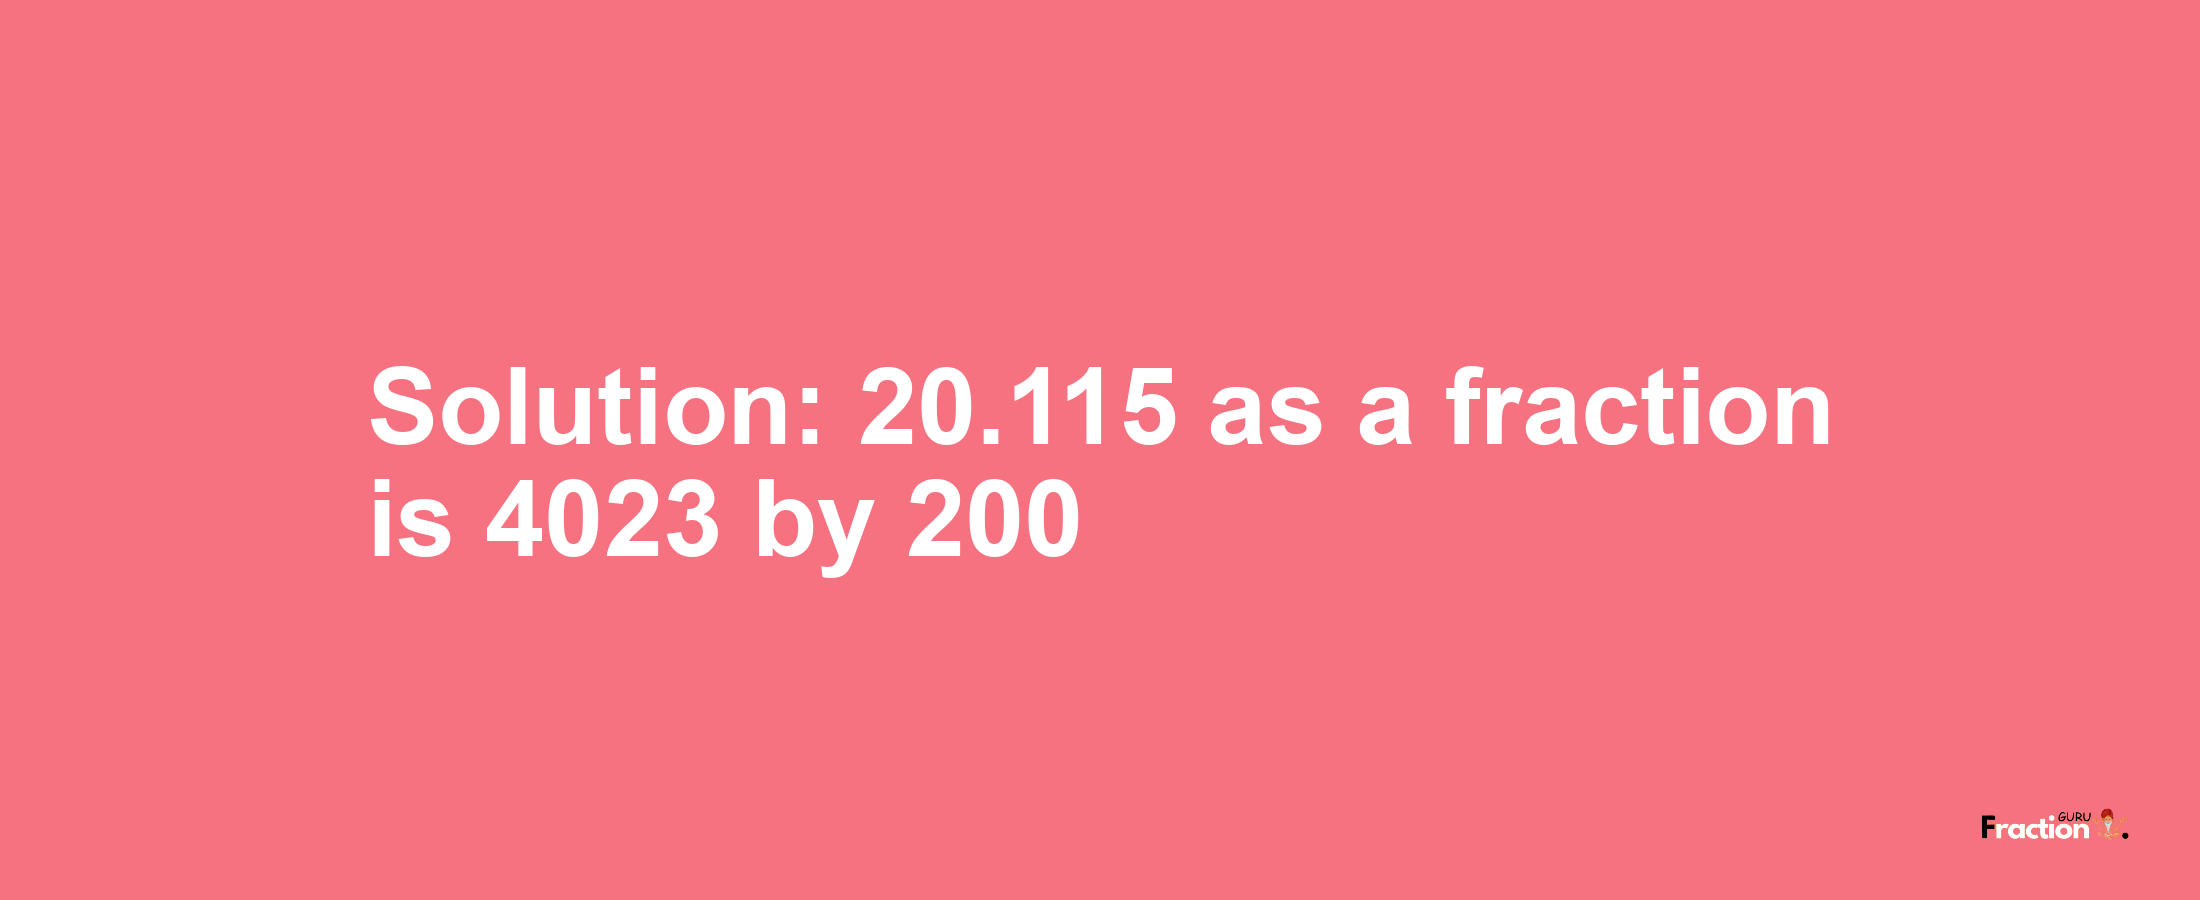 Solution:20.115 as a fraction is 4023/200